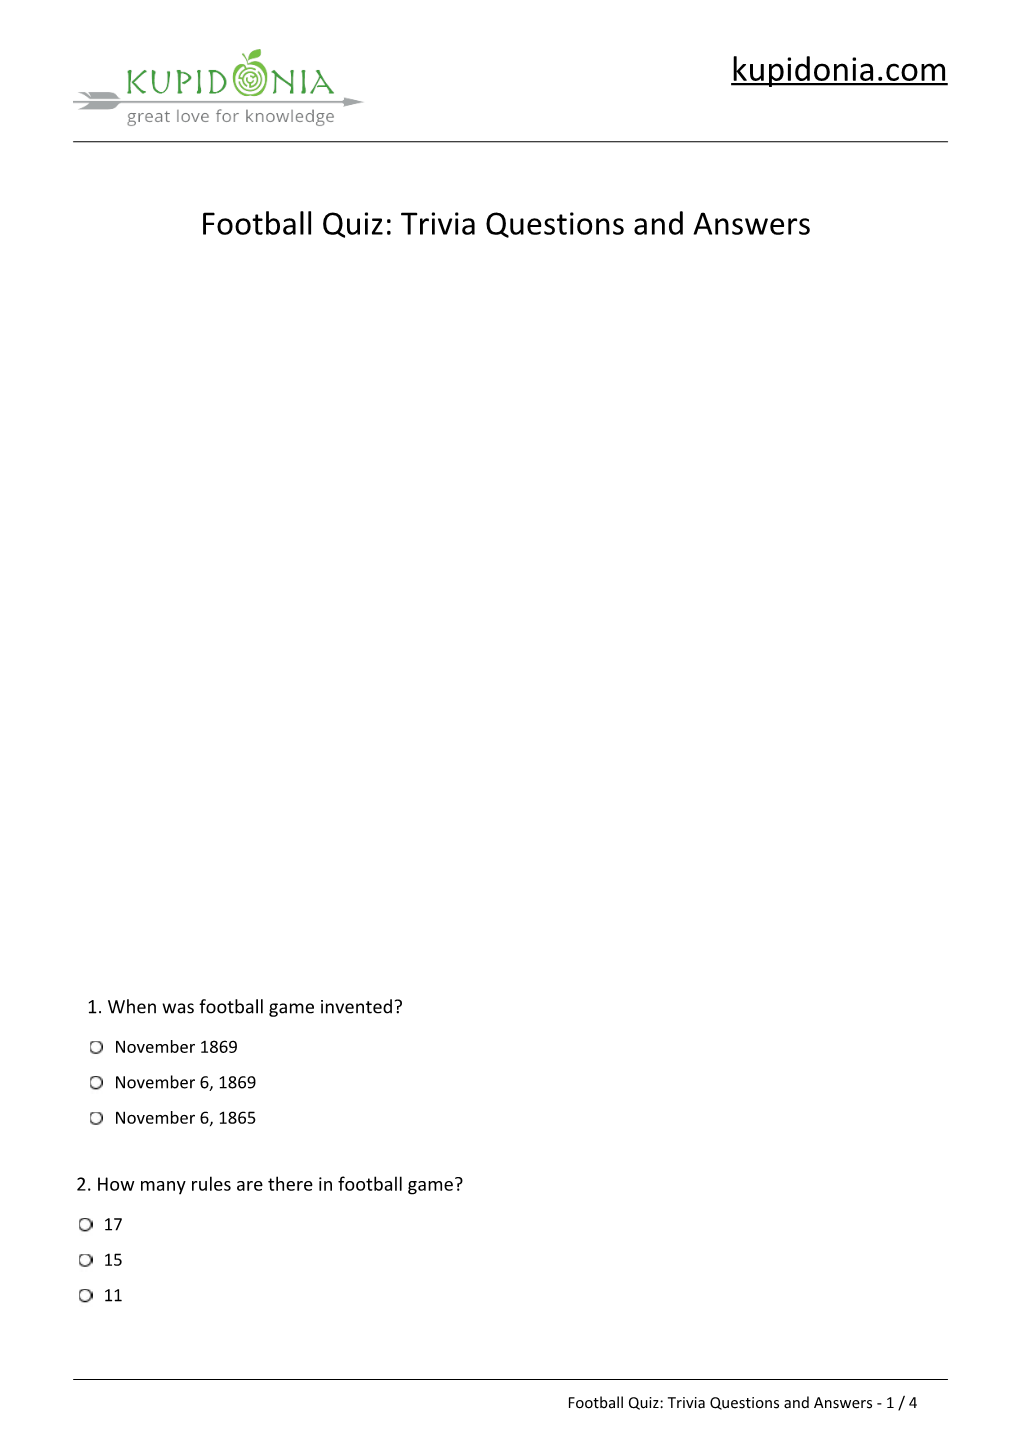 Football Quiz: Questions and Answers